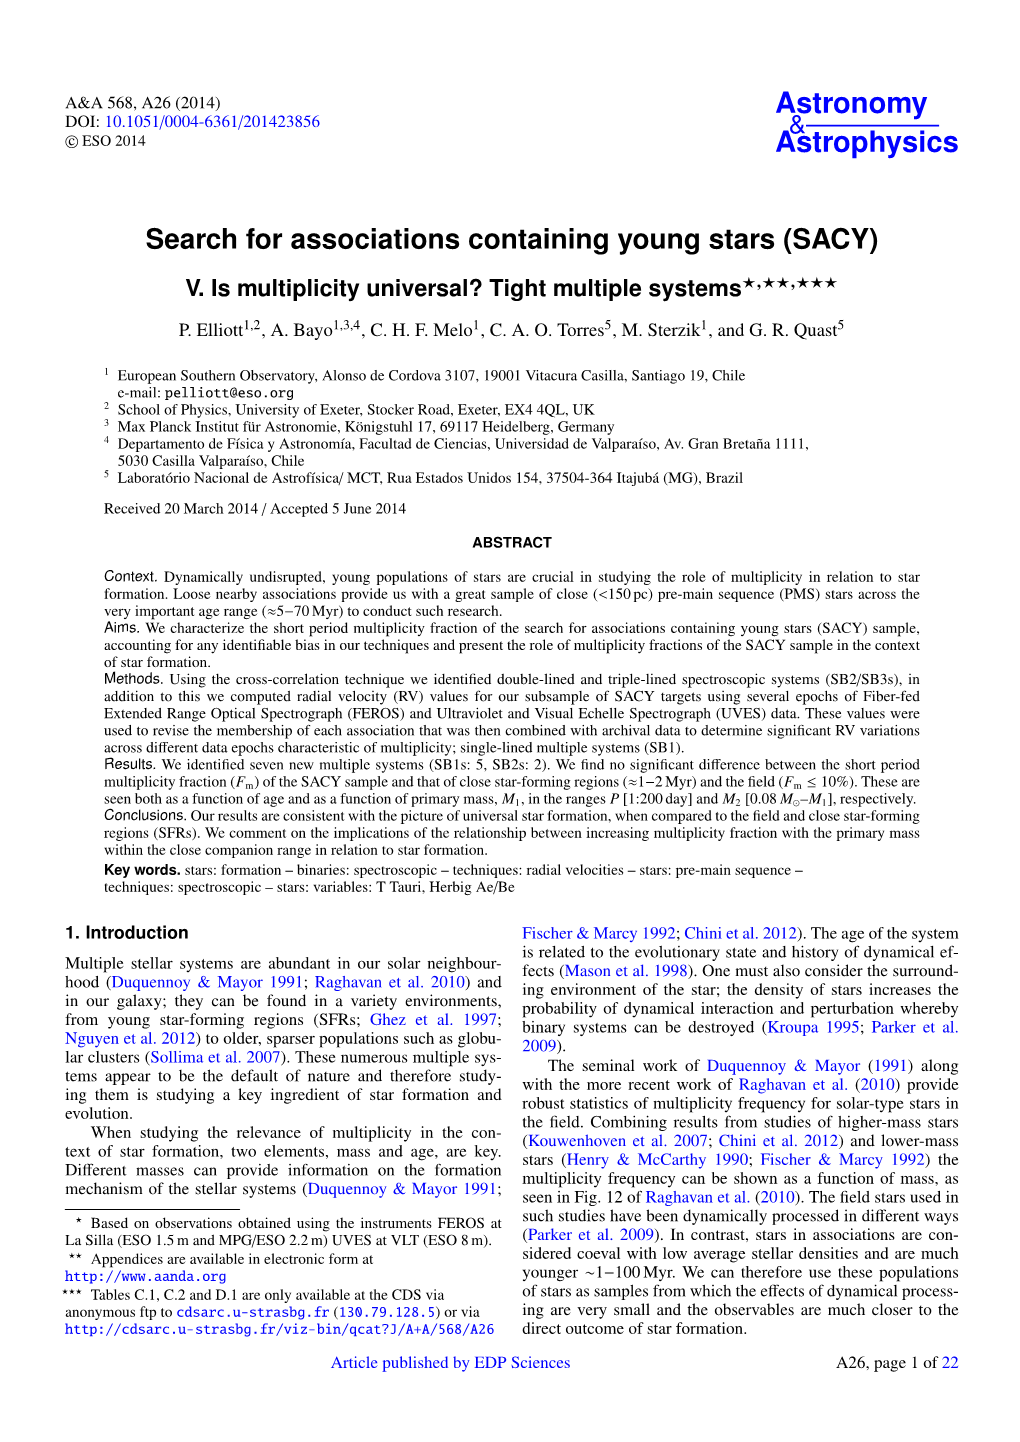 Search for Associations Containing Young Stars \(SACY\)